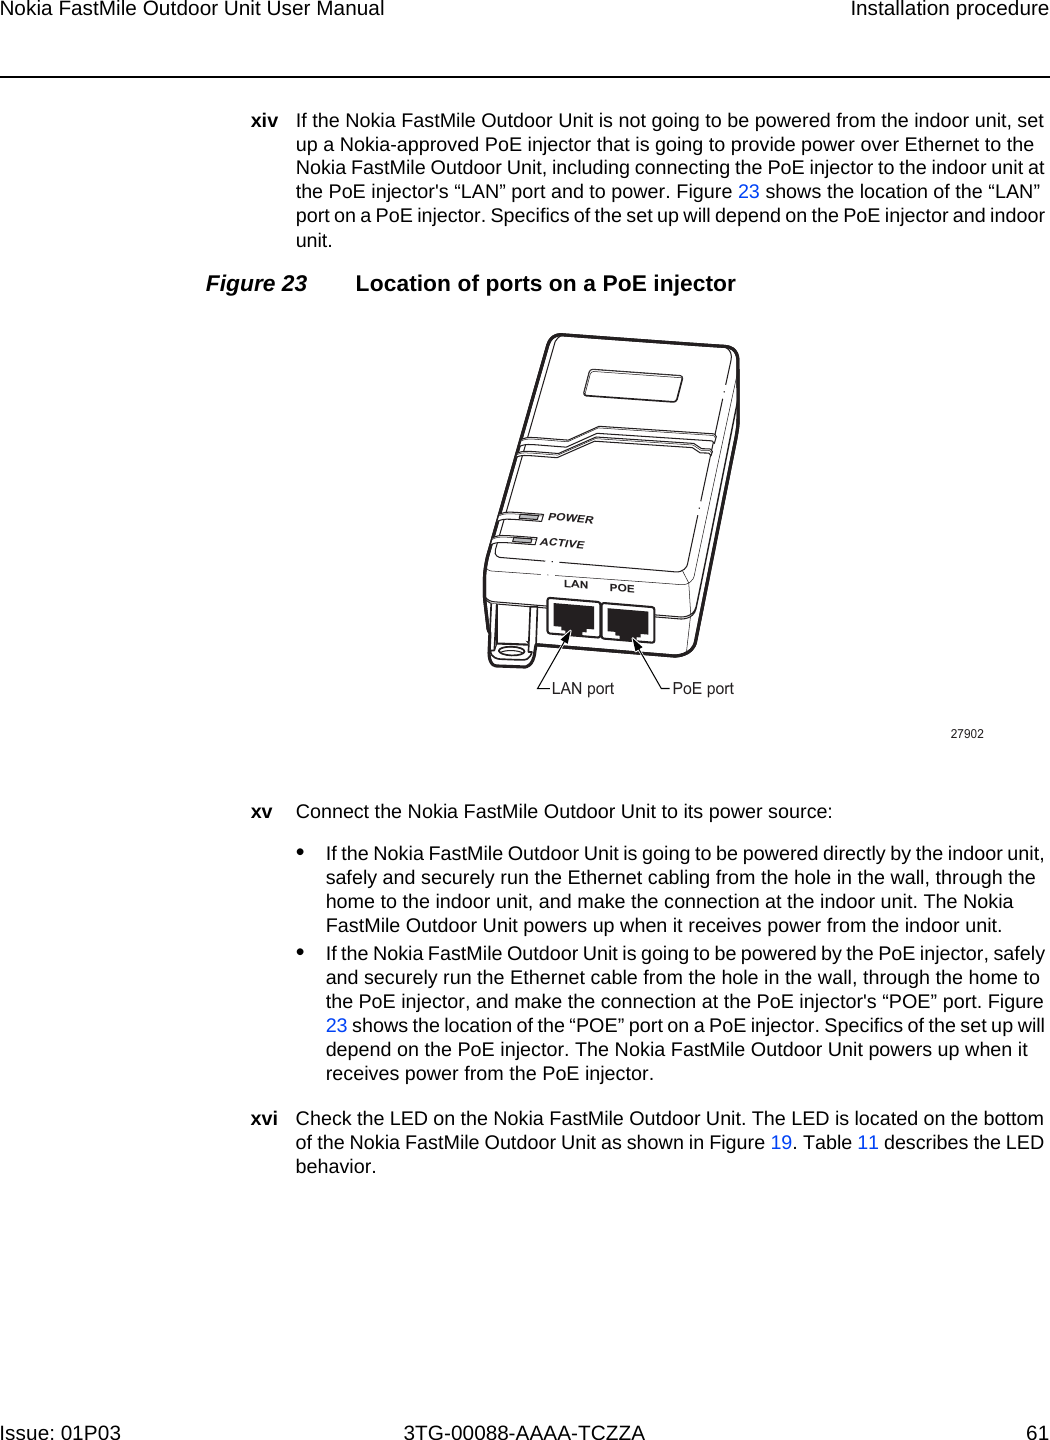 Page 56 of Nokia Bell 34003800FM20 FastMile Compact User Manual Nokia FastMile Outdoor Unit